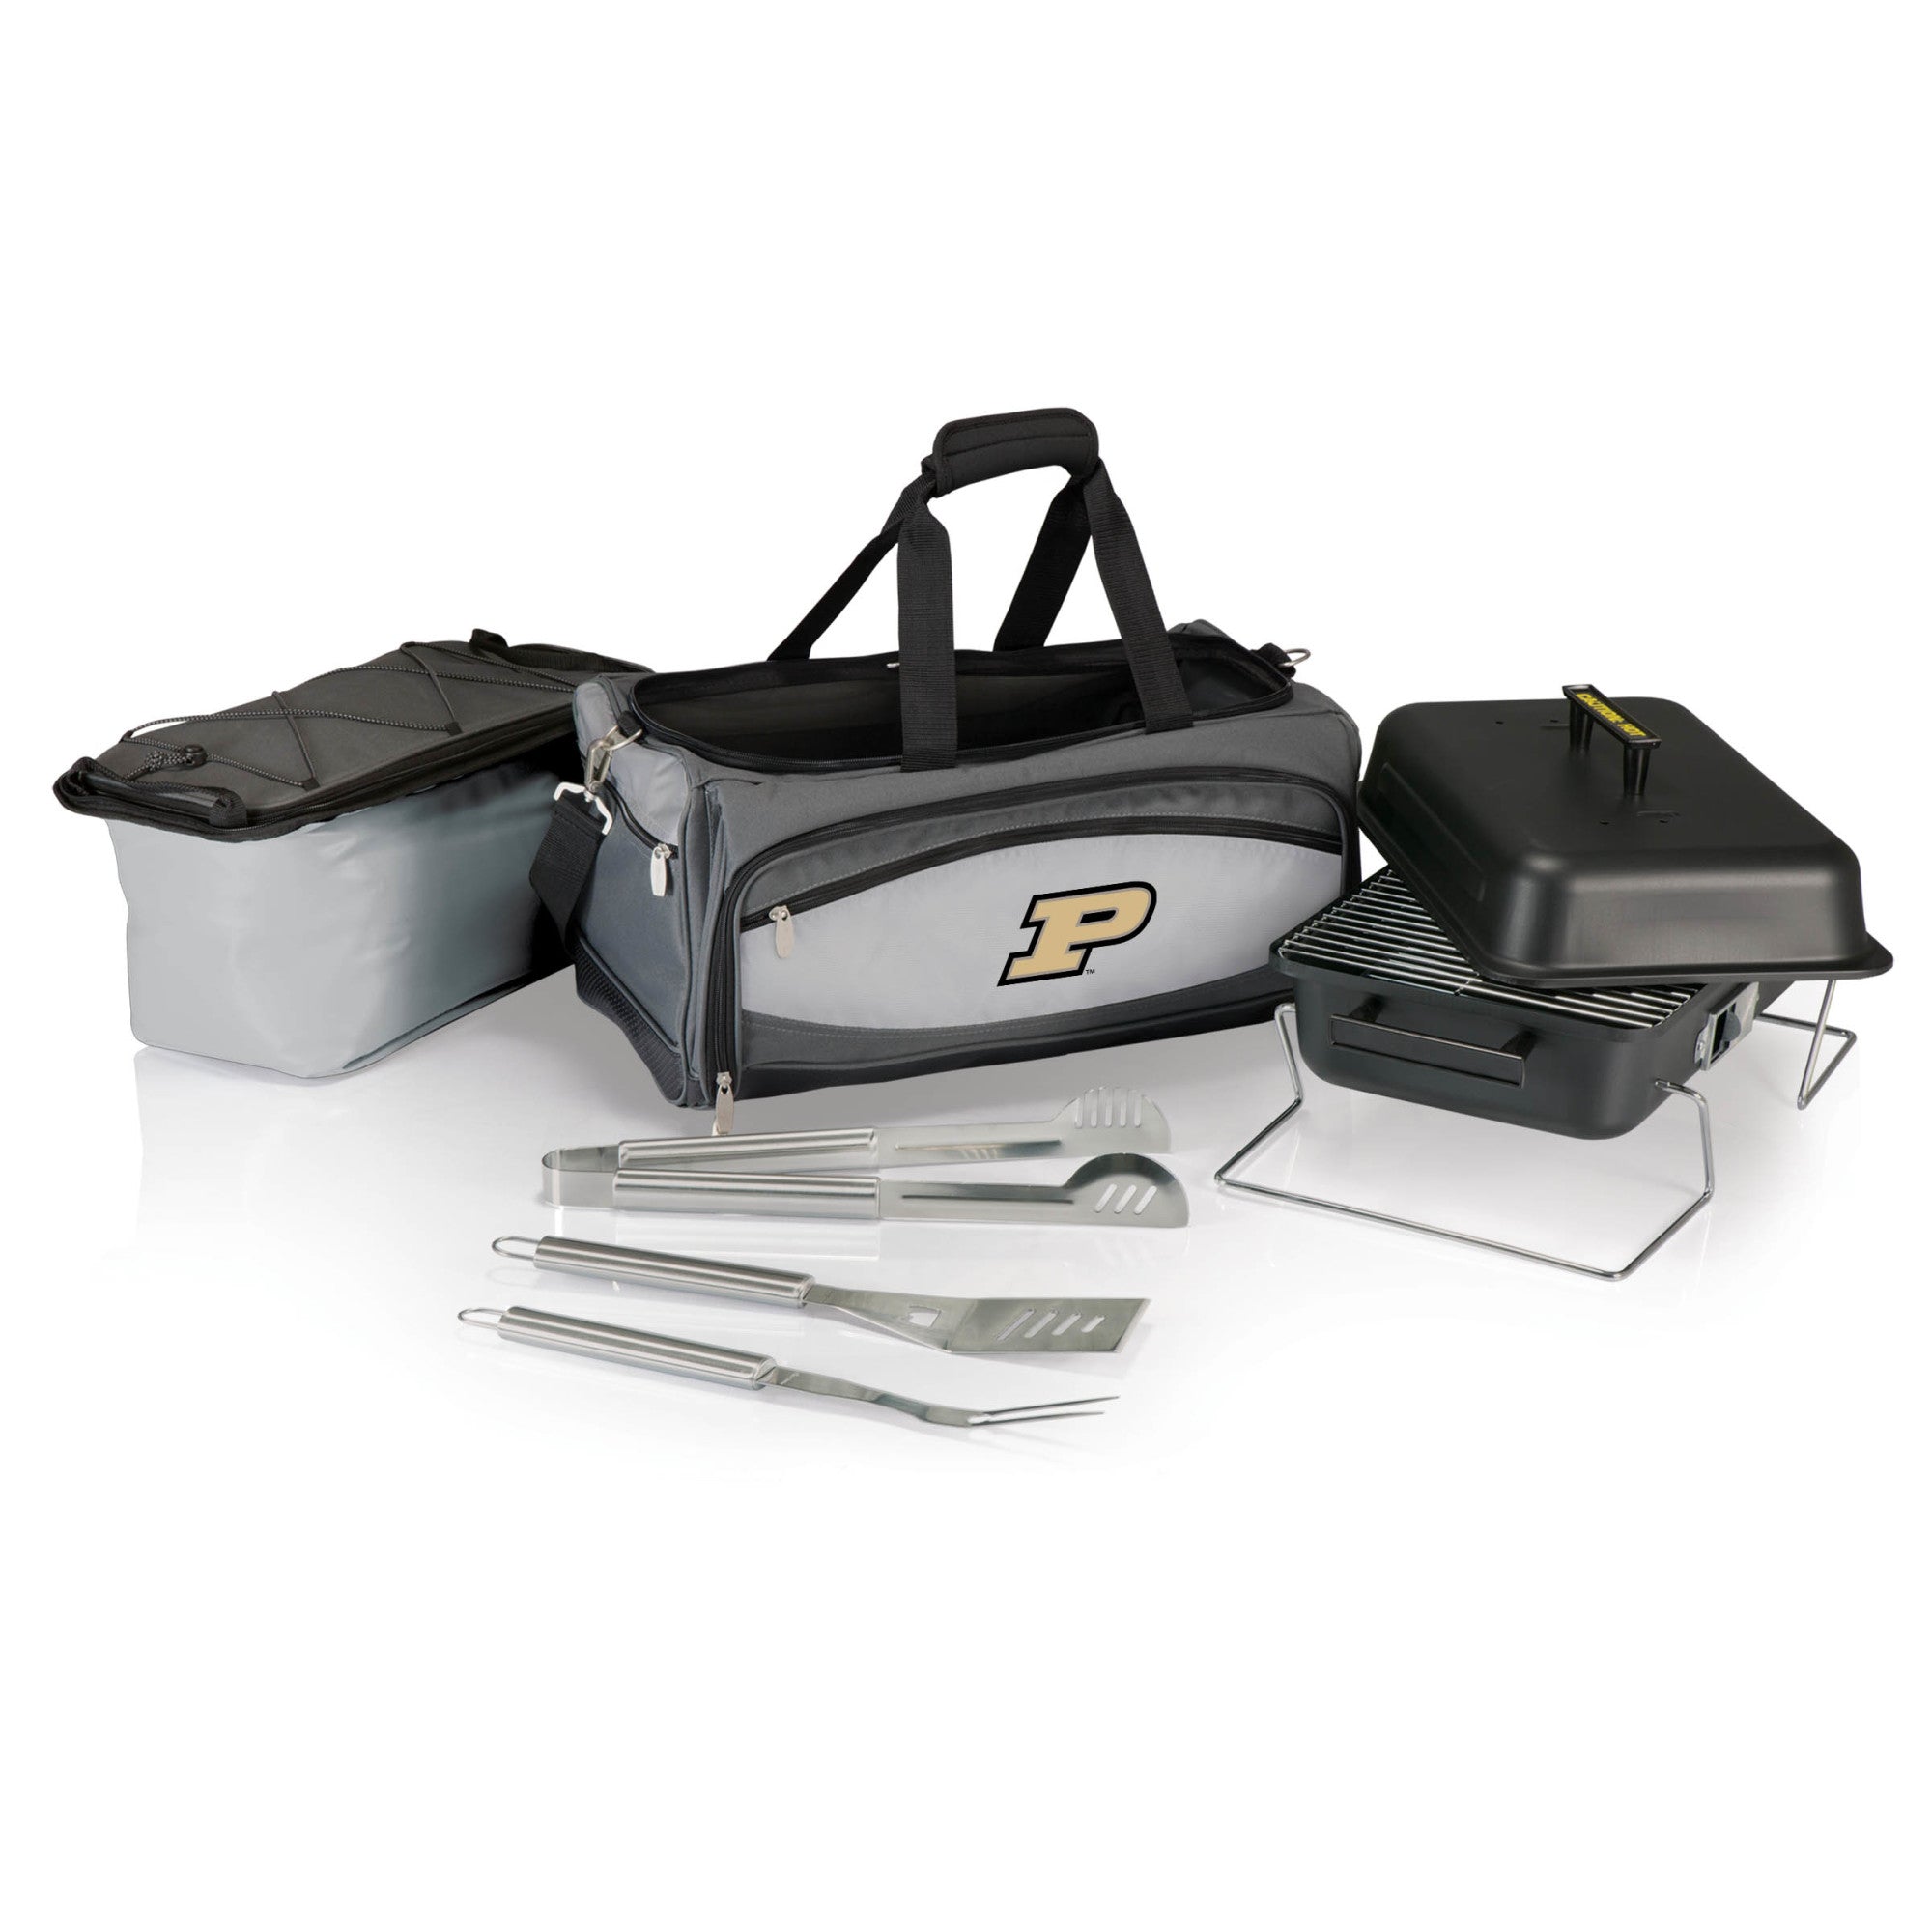 Purdue Boilermakers - Buccaneer Portable Charcoal Grill & Cooler Tote